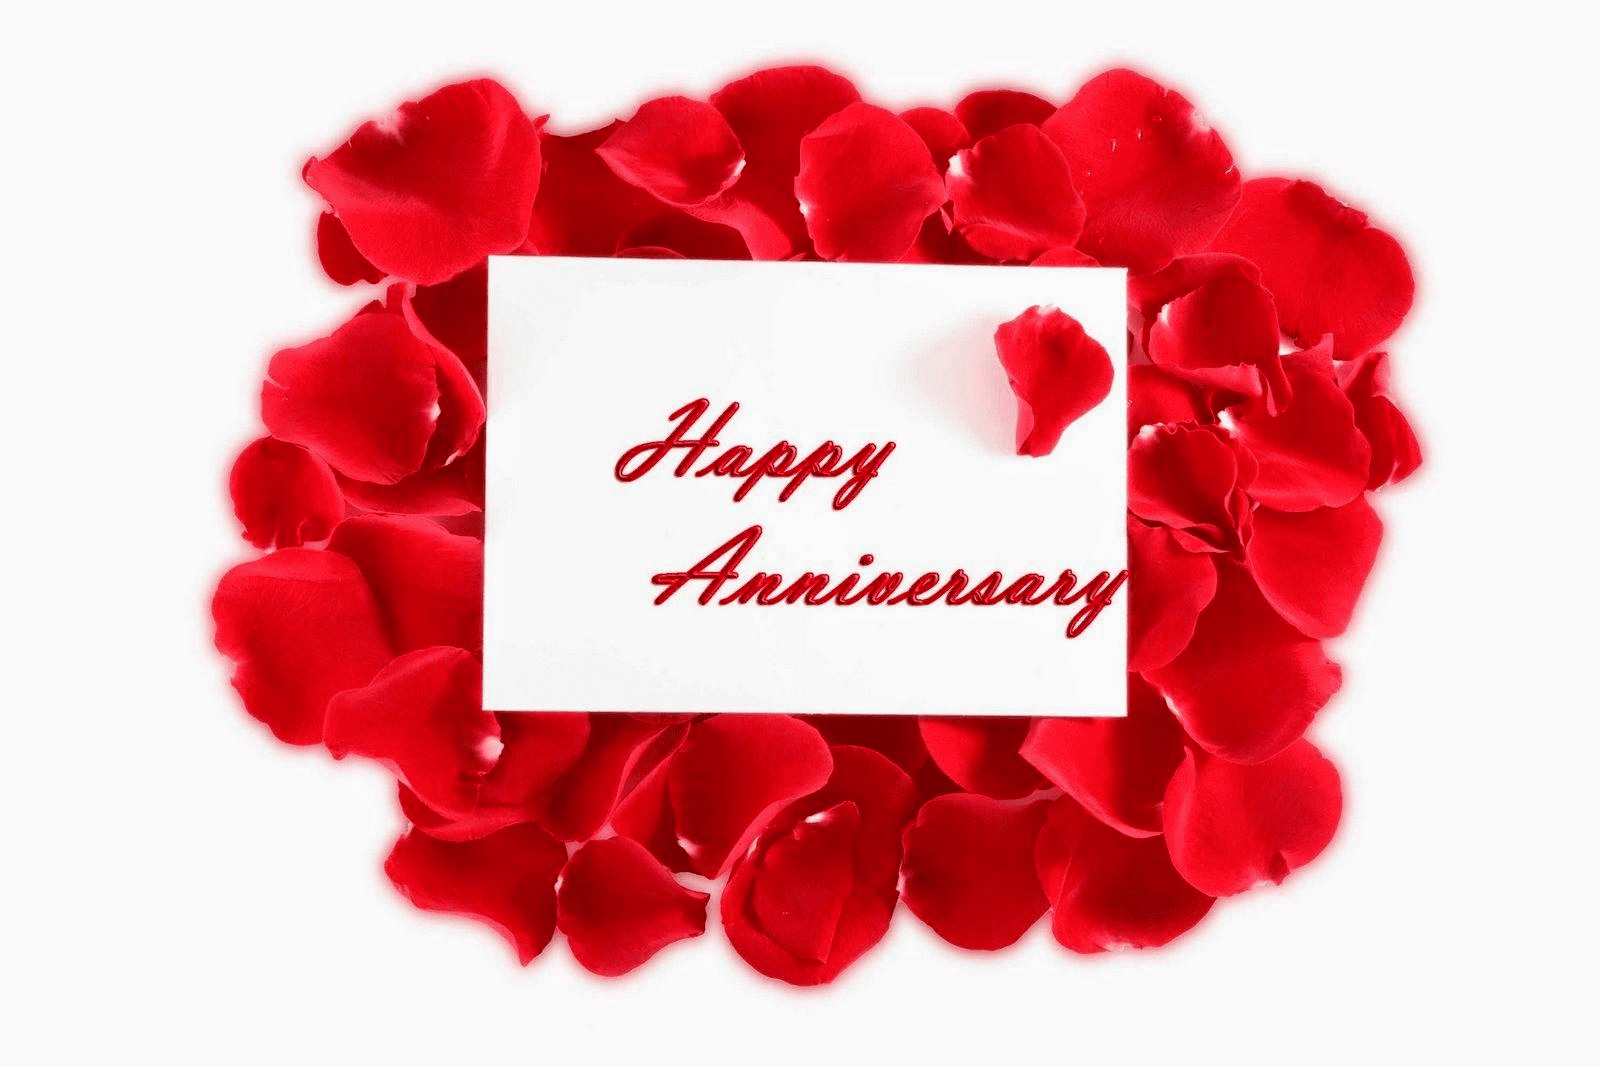 50+ Happy 2nd Anniversary Wishes for Wedding – Messages, Status, Quotes, & Images